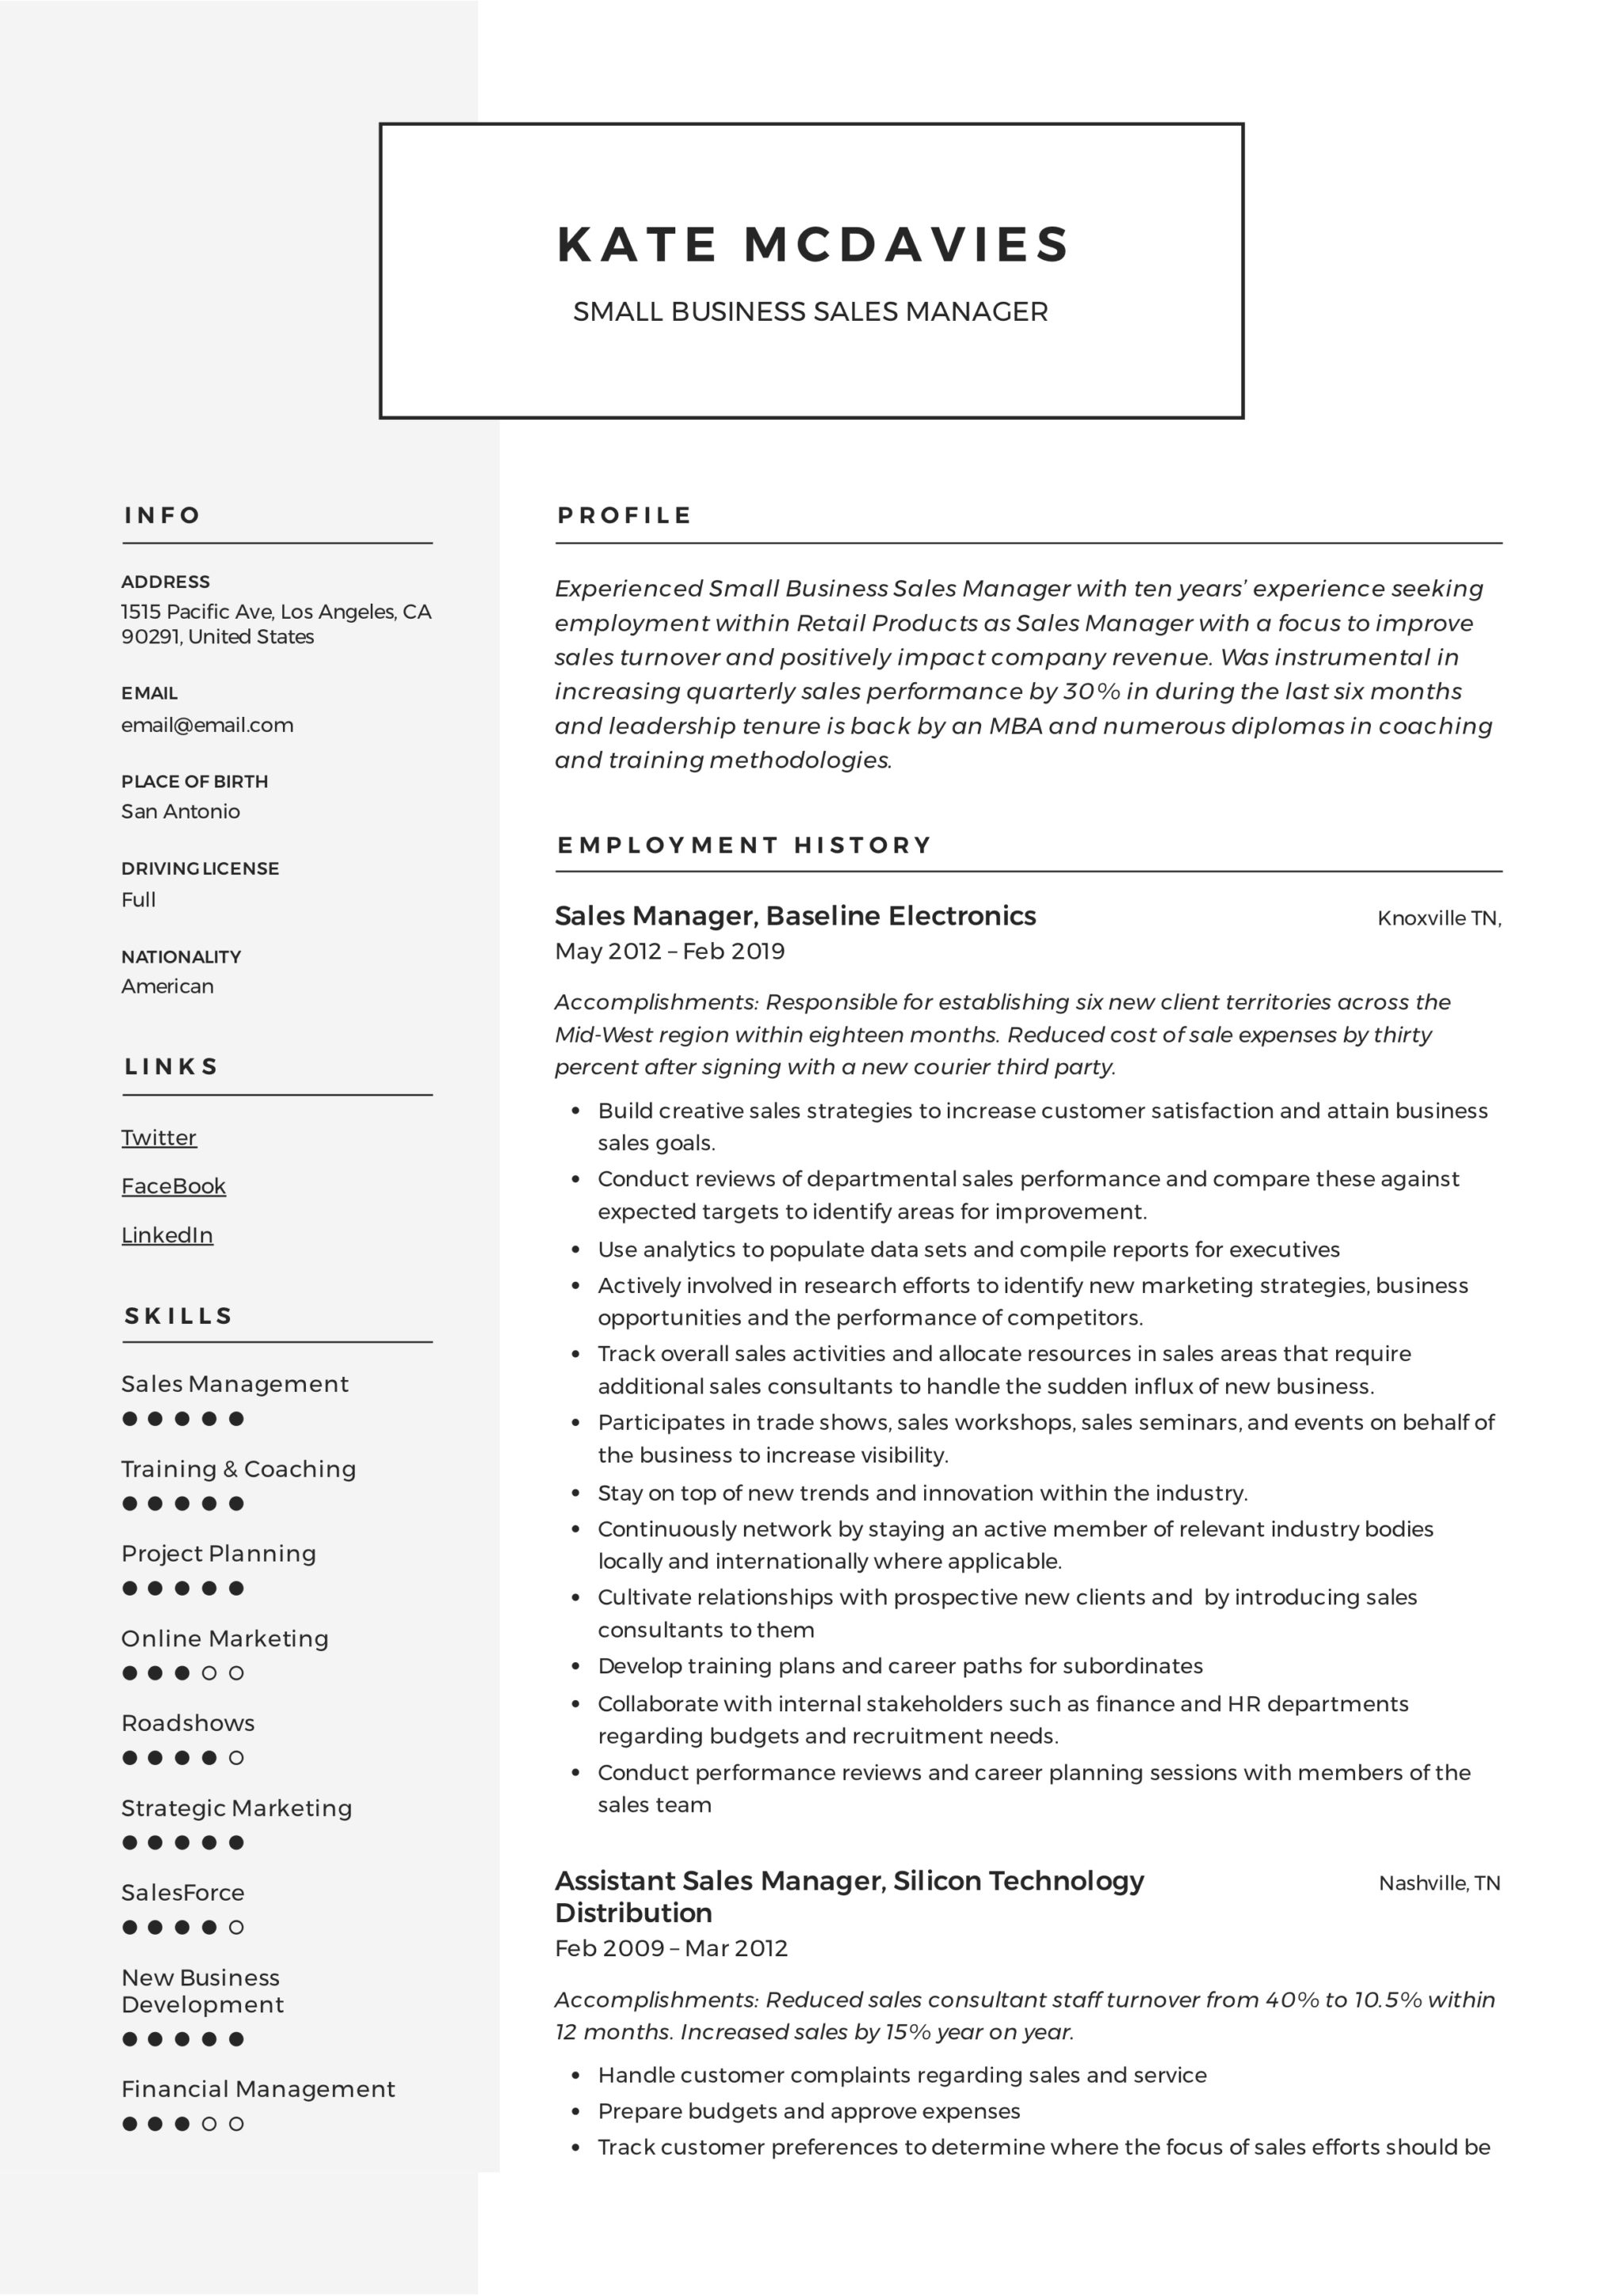 Small Business Sales Manager Resume Example (4)